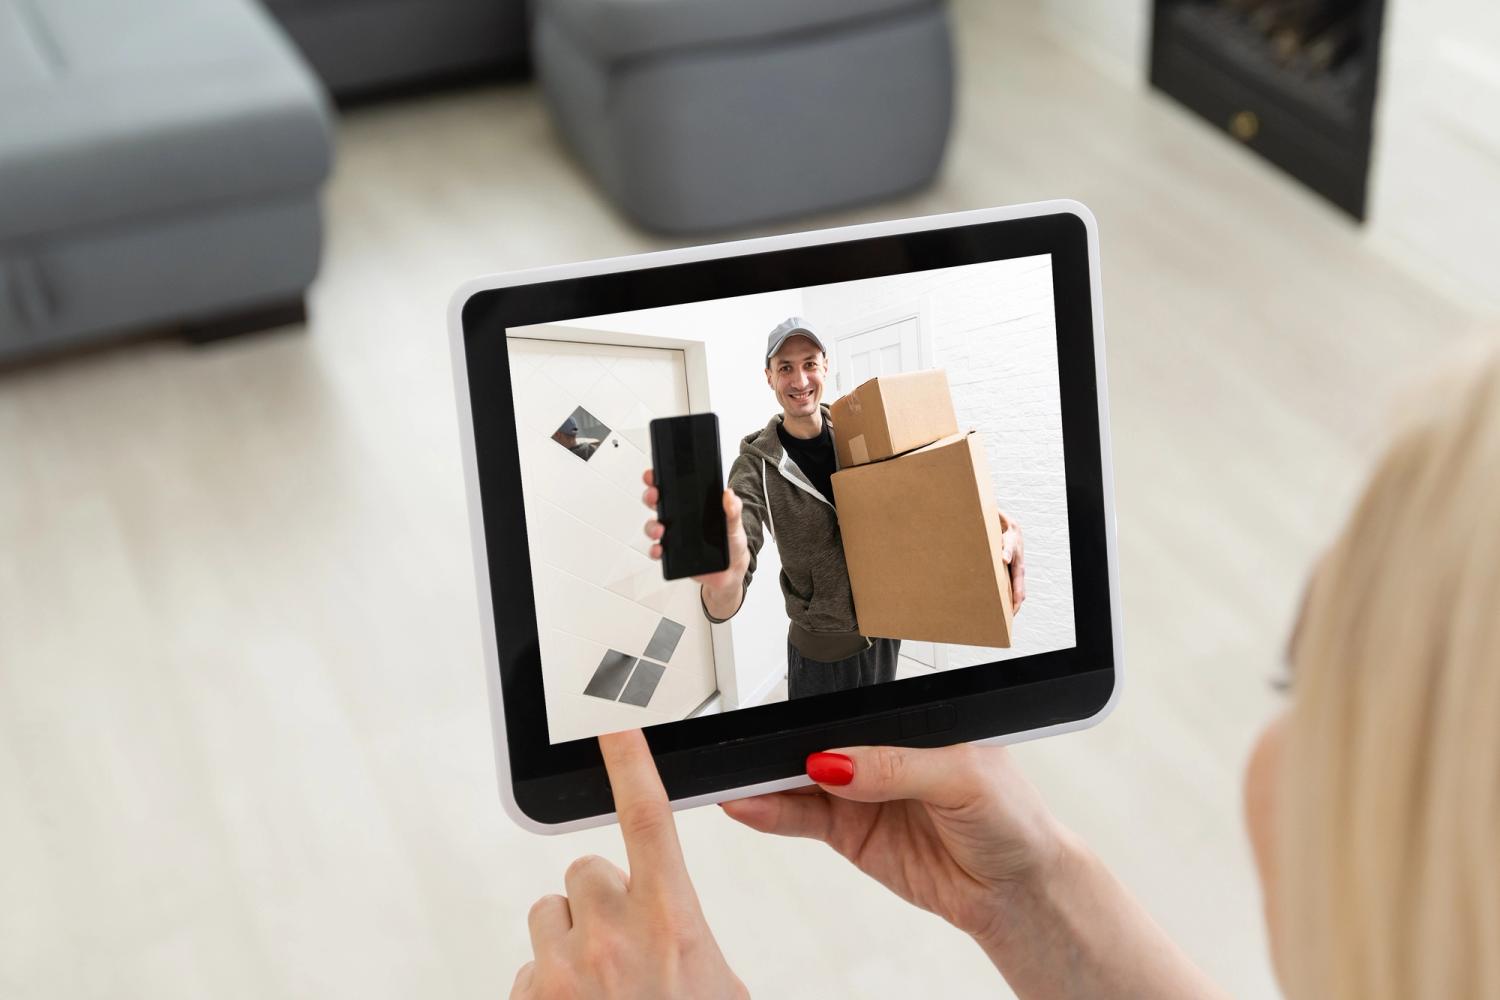 Delivery man at video doorbell on ipad